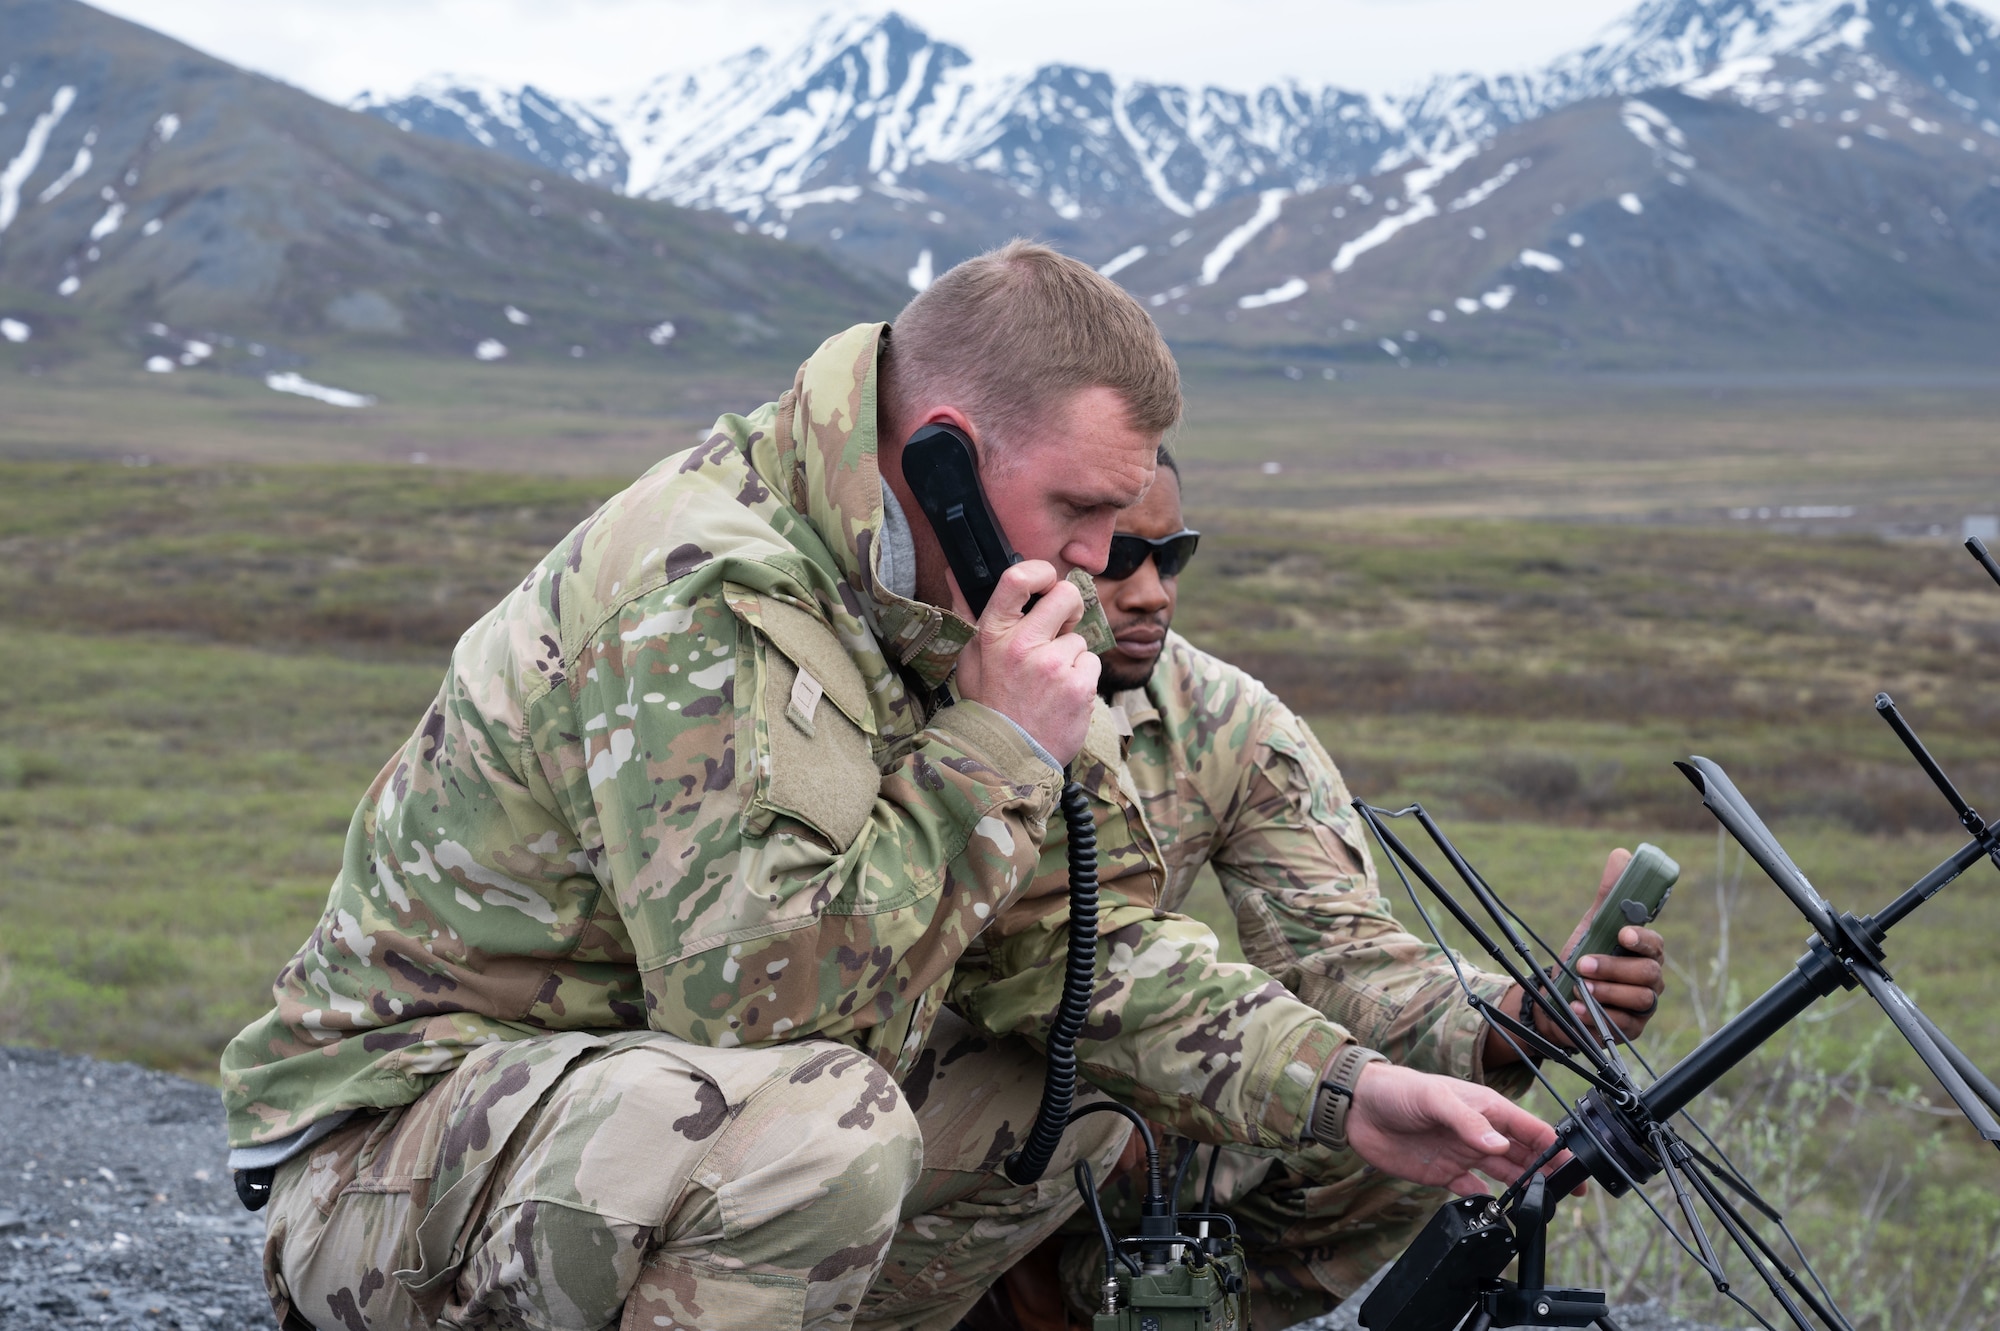 U.S. Air Force Airmen from the 55th and Combat Communications Squadrons, Tinker Air Force Base, Oklahoma remotely establish communication from northern Alaska with counterparts in Tinker AFB and British Columbia using a ultra high frequency antenna and a high frequency radio as part of Exercise AGILE BLIZZARD-UNIFIED VISION Phase II on  June 13, 2023. This portion of the exercise took place north of Coldfoot, Alaska close to 100 miles into the arctic circle. (U.S. Air Force photo by Staff Sgt. Dana Tourtellotte)